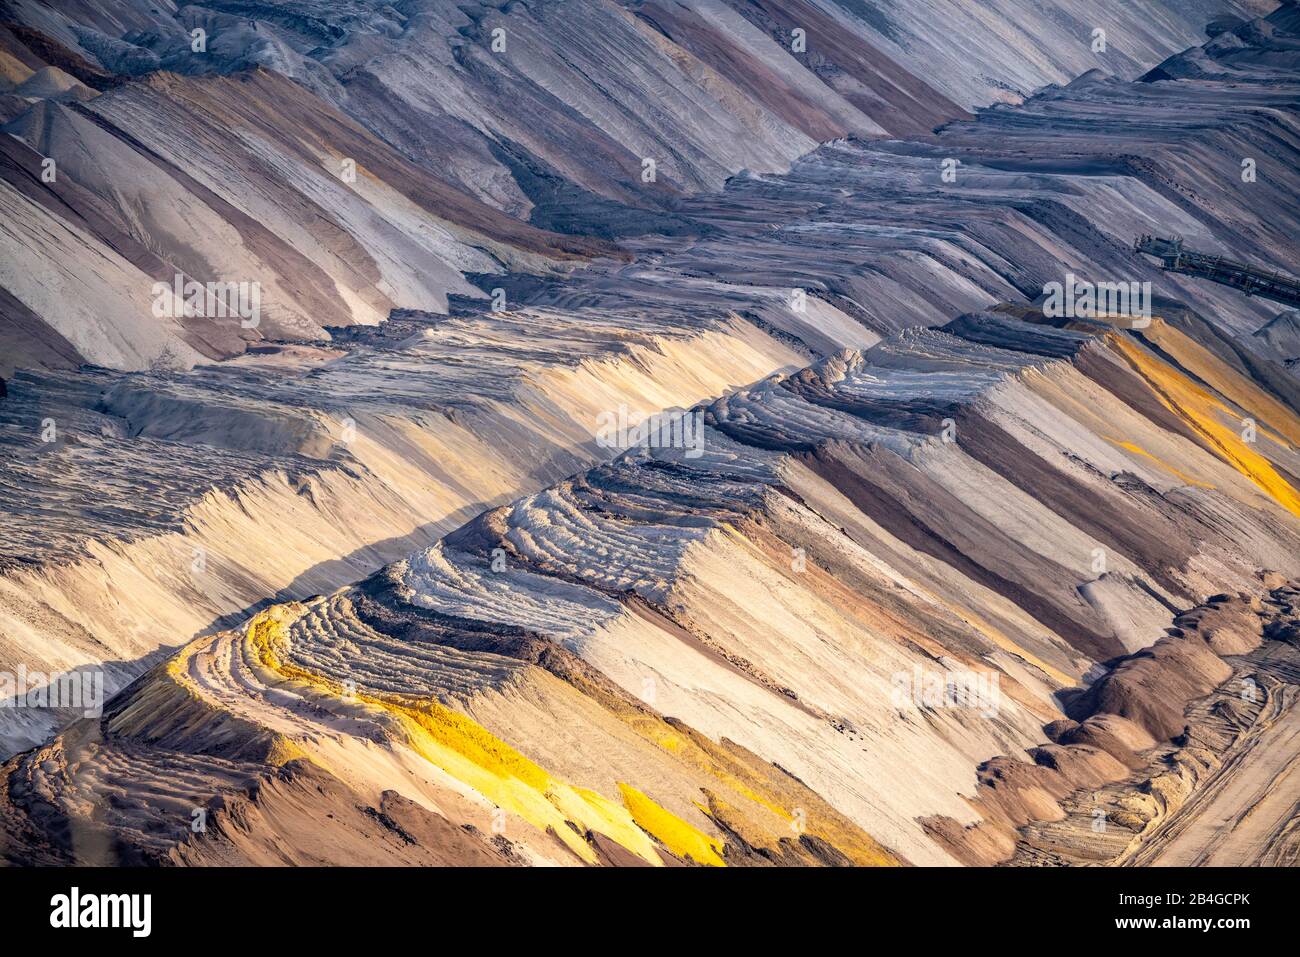 Lignite opencast mine Garzweiler II, filled up layers of earth, overburden, Germany, Stock Photo